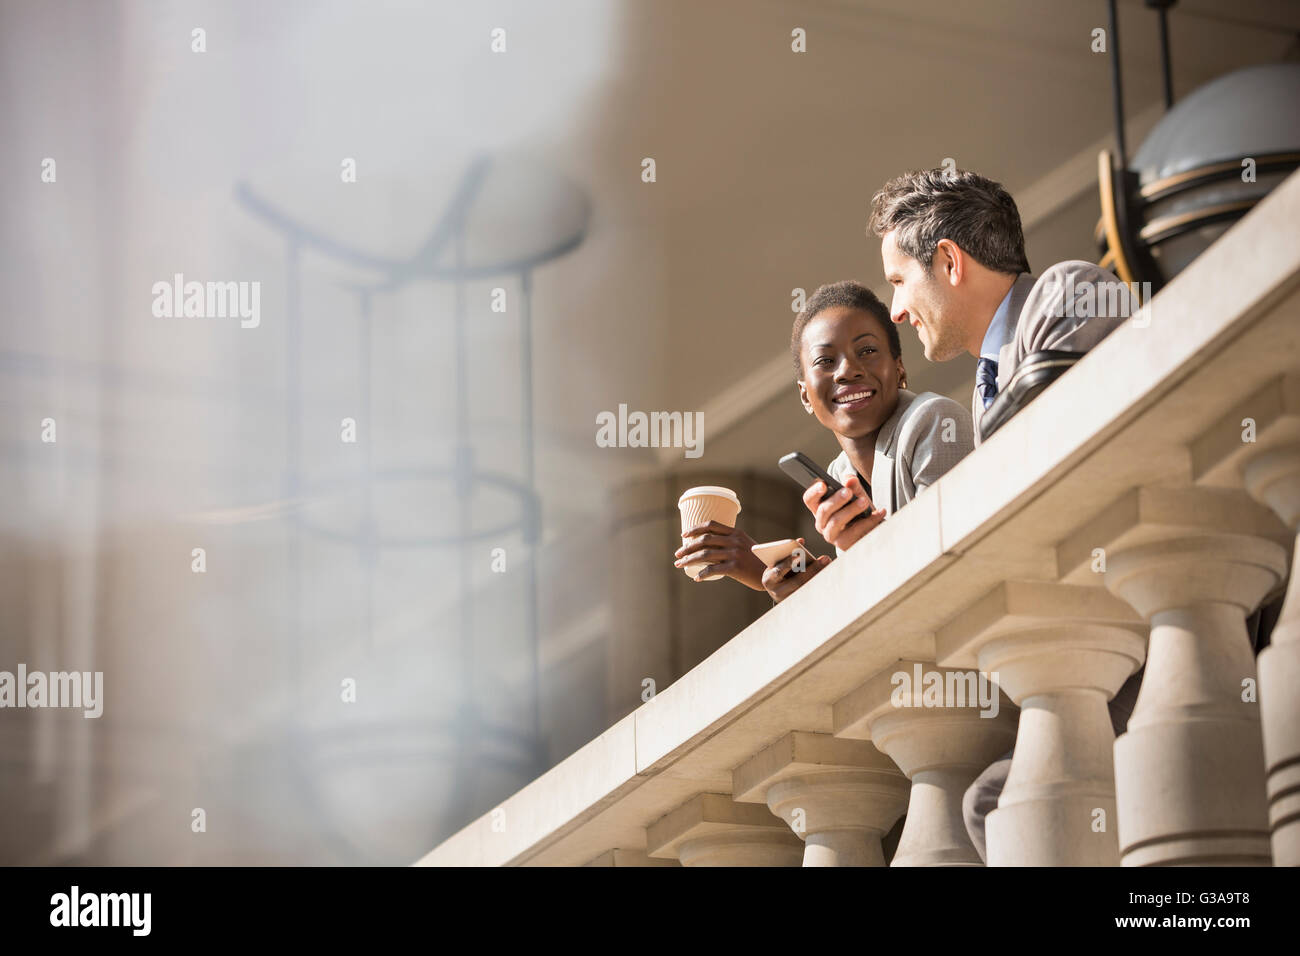 Corporate businessman and businesswoman drinking coffee at railing Banque D'Images